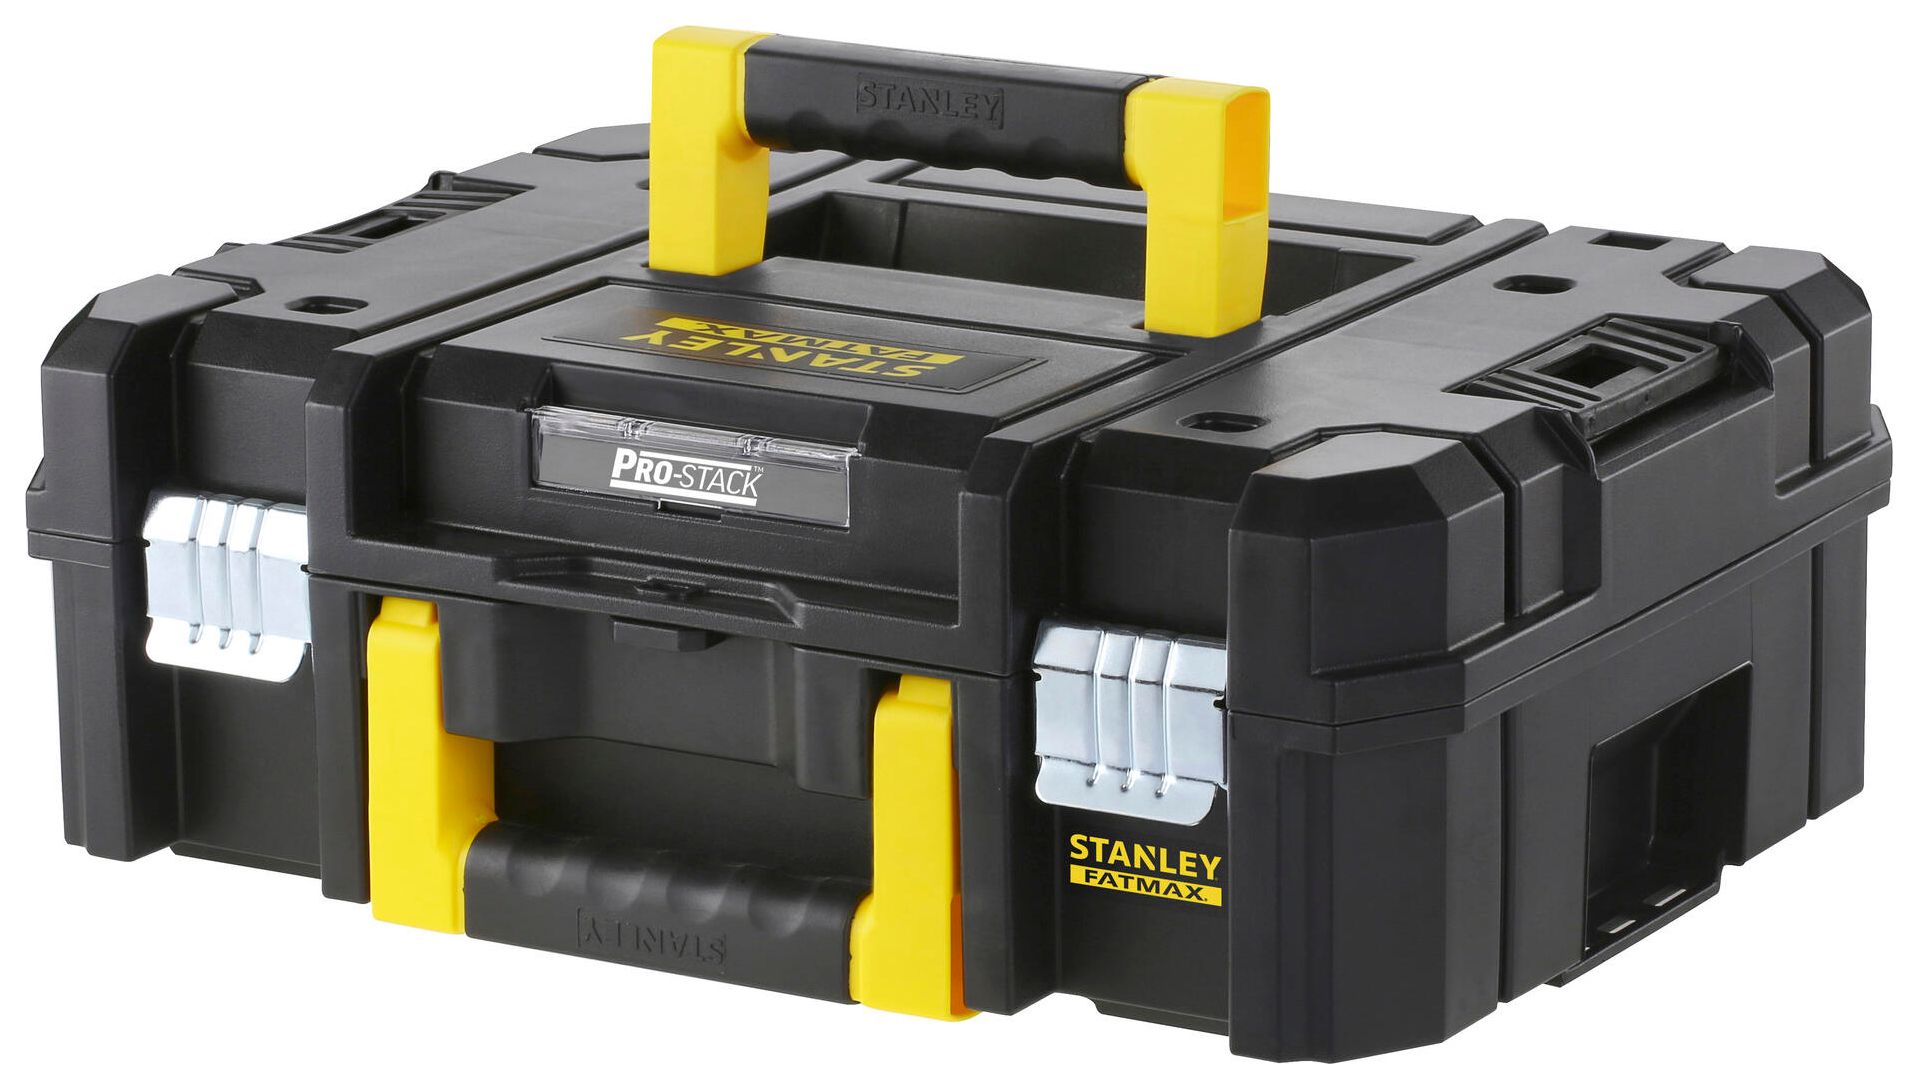 Image of STANLEY FATMAX PROSTACK™ Shallow Toolbox (No Foam)